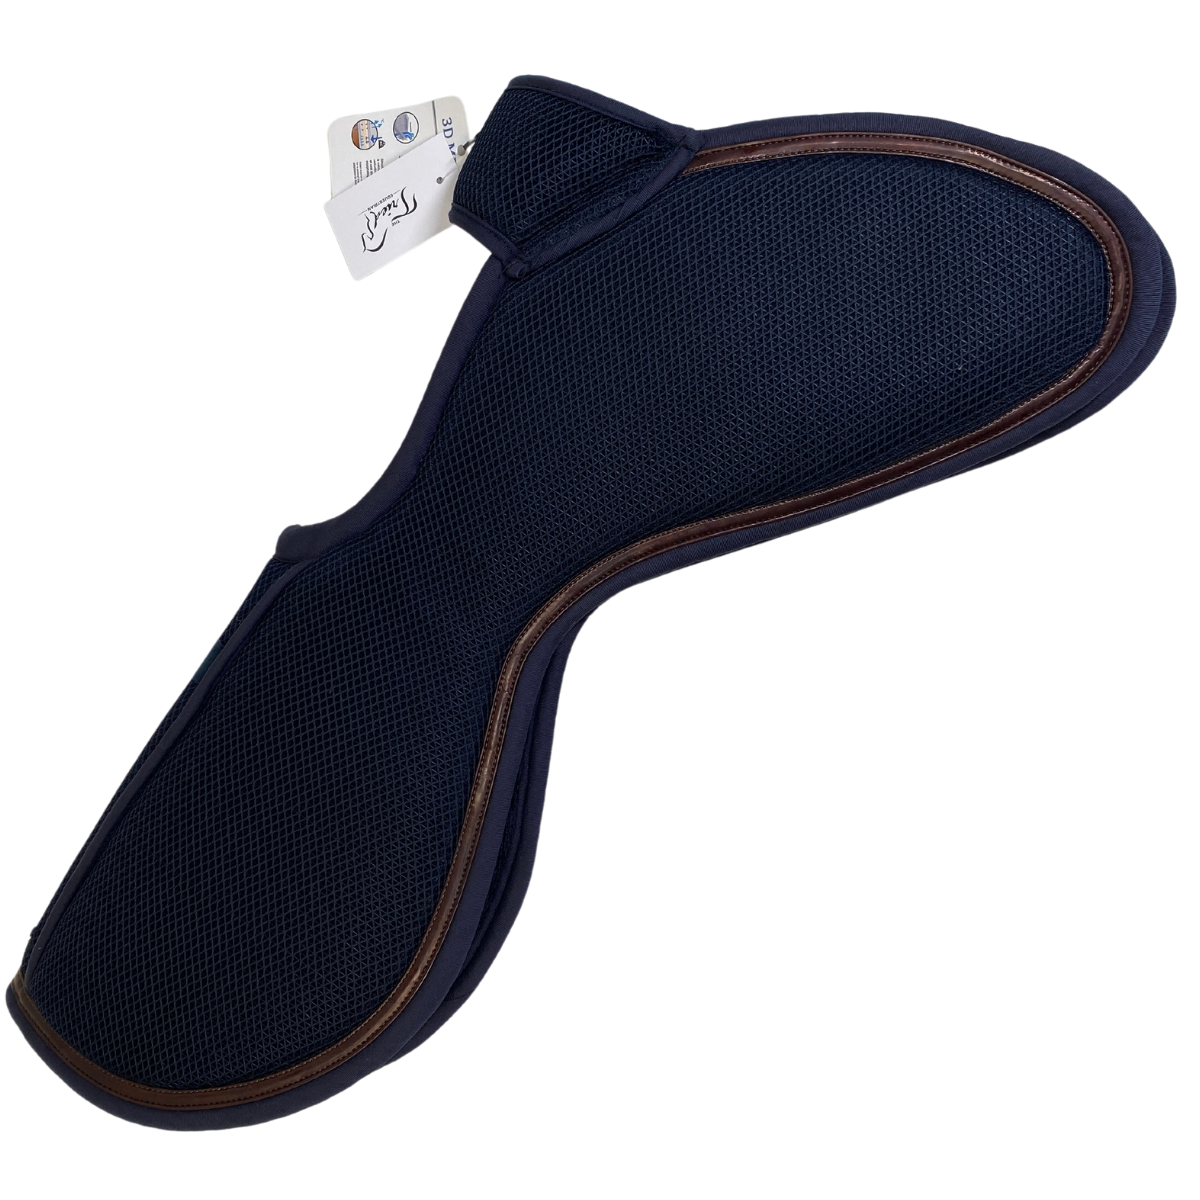 Jump'in Mesh Half Pad in Navy w/Chocolate